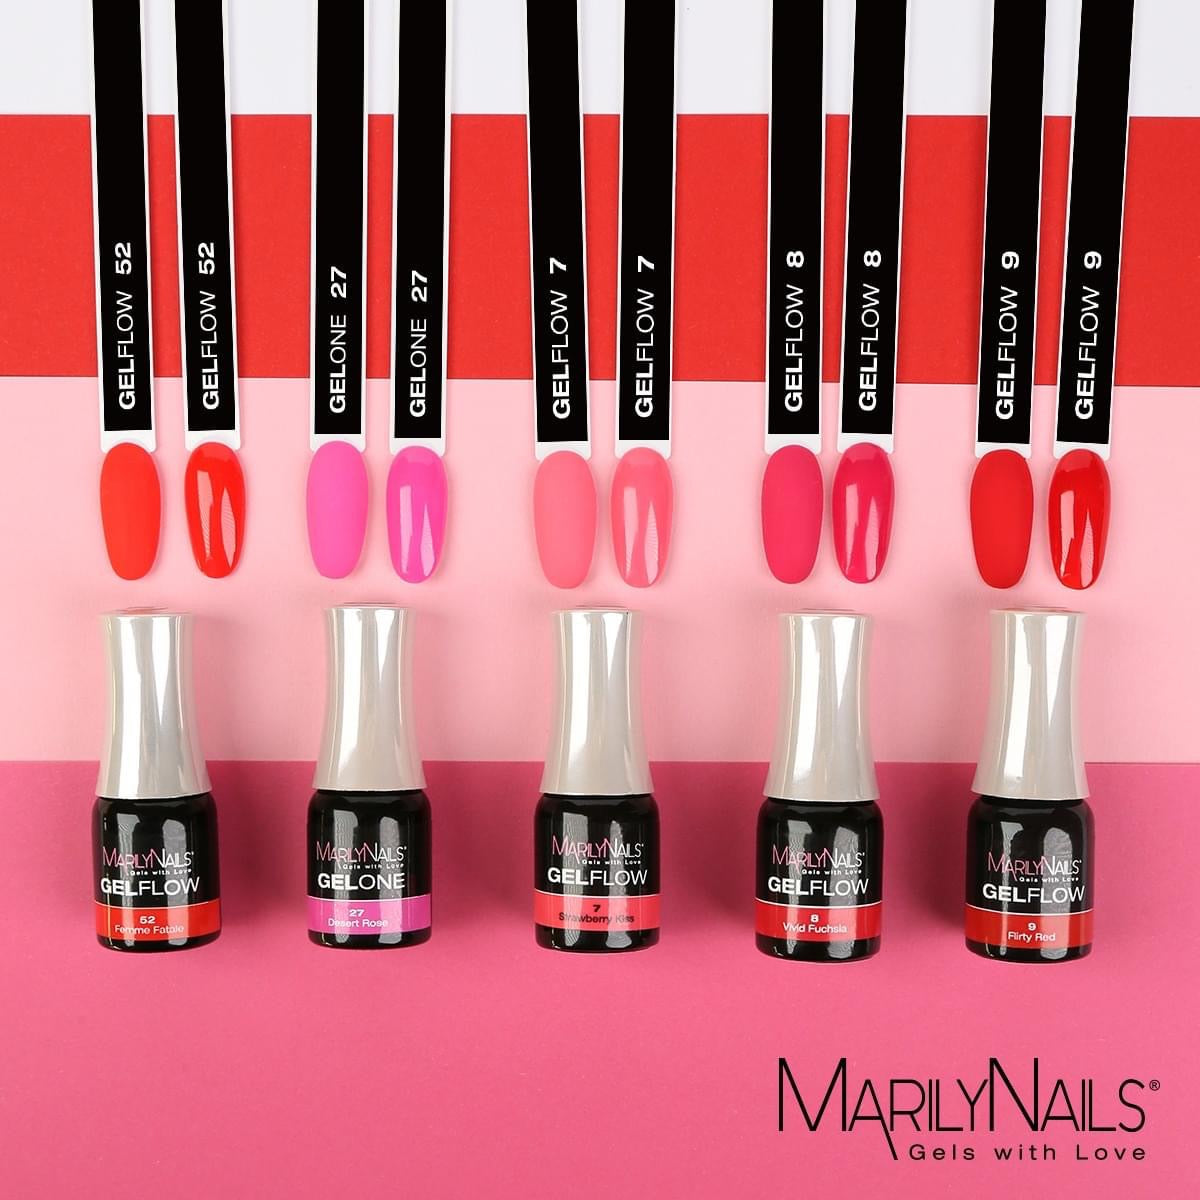 MarilyNails GelFlow - 7 Strawberry Kiss